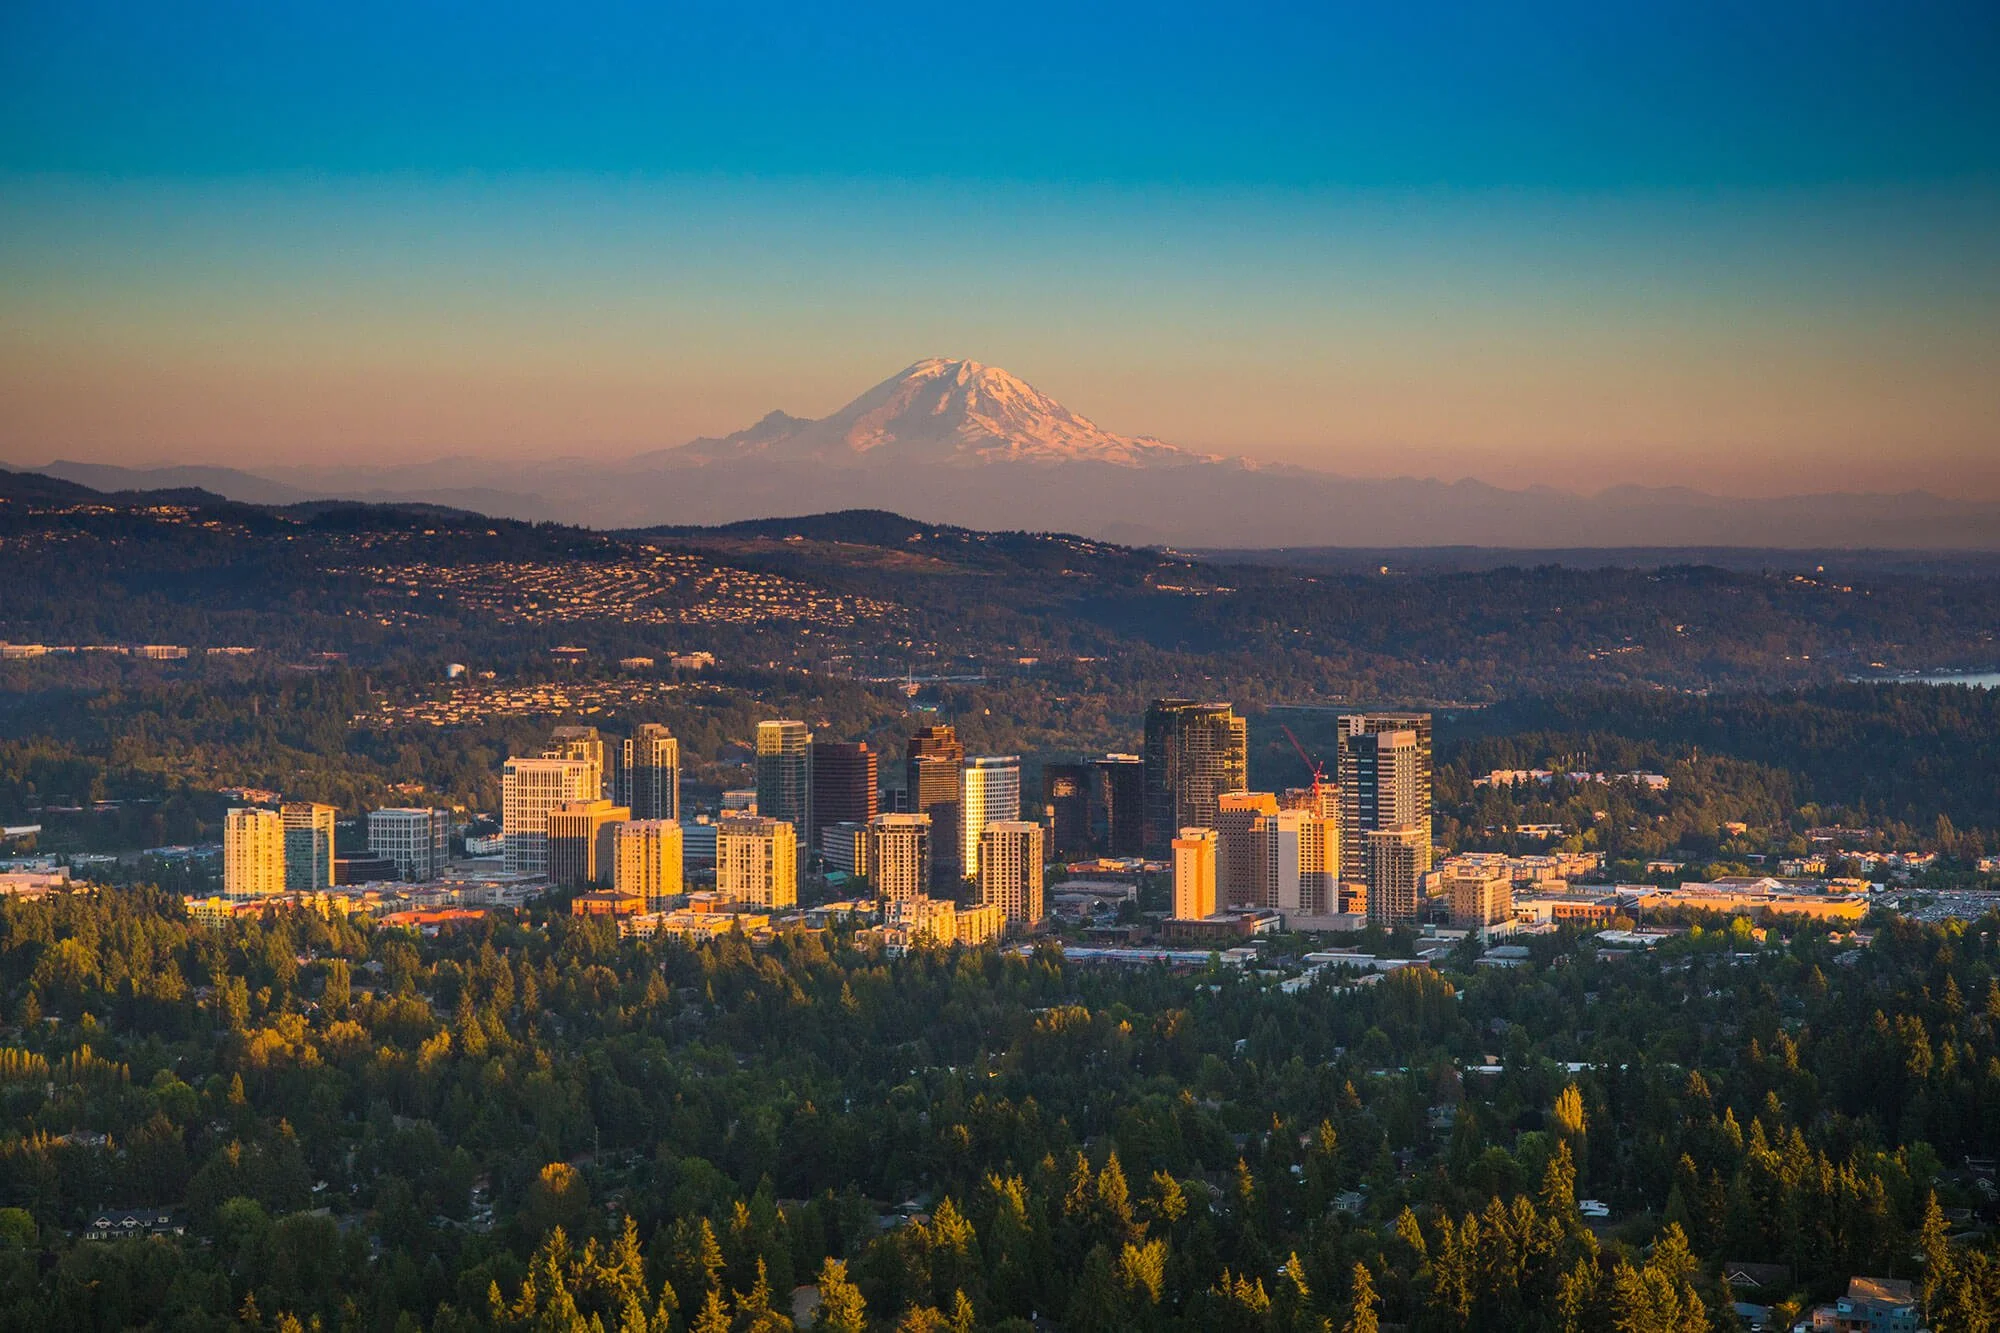 Panoramic view of Bellevue Washington with Mt. Rainier in the background